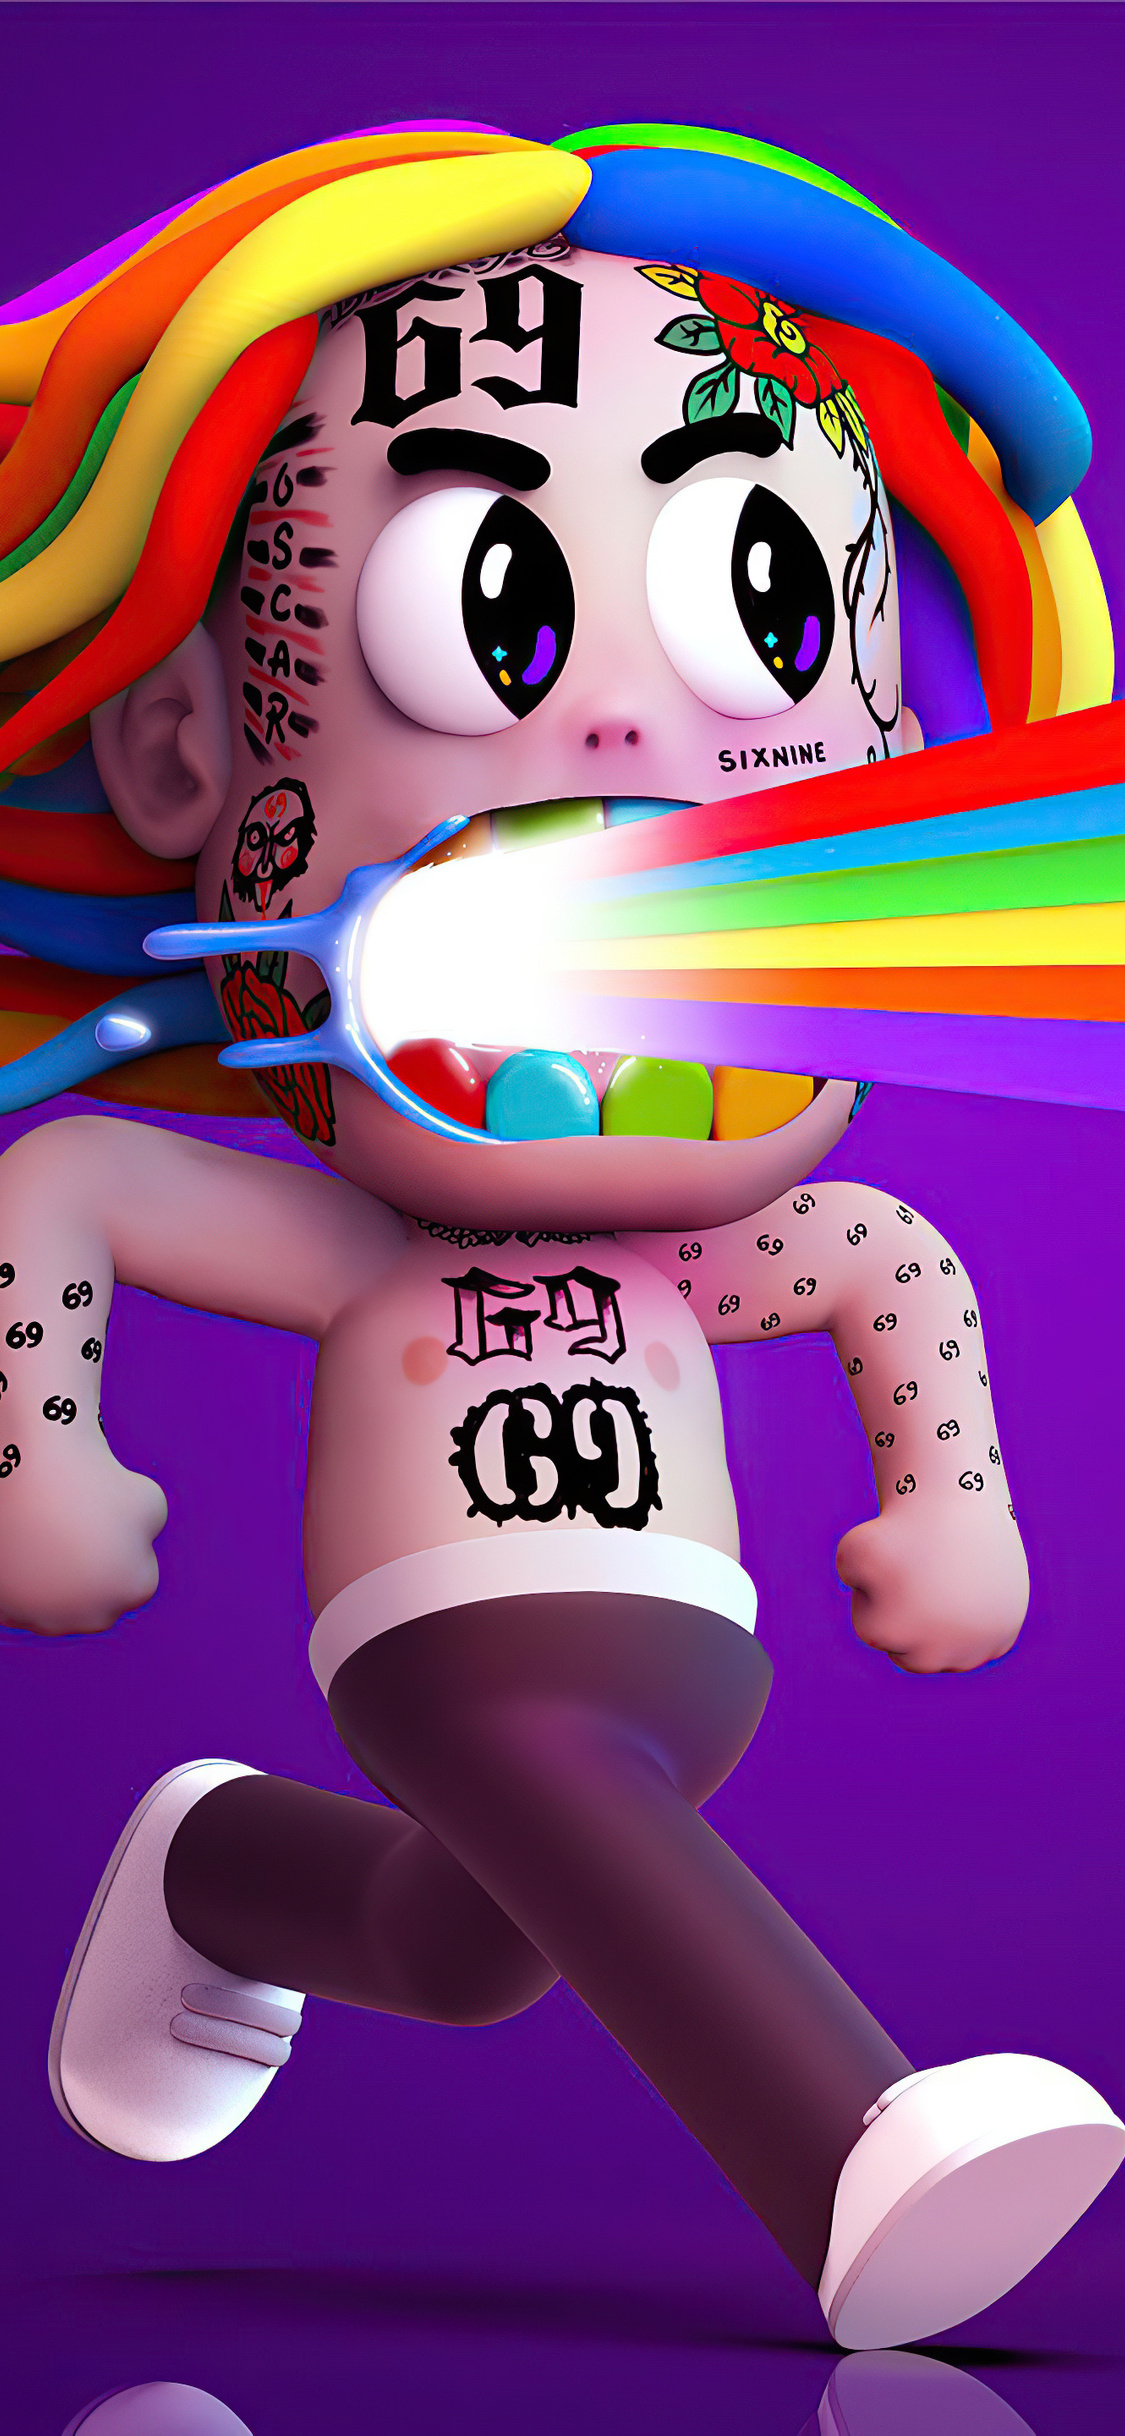 HD wallpaper, Iphone Hd 6Ix9Ine Background Image, 6Ix9Ine Wallpapers Posted By Michelle Peltier 1130X2440